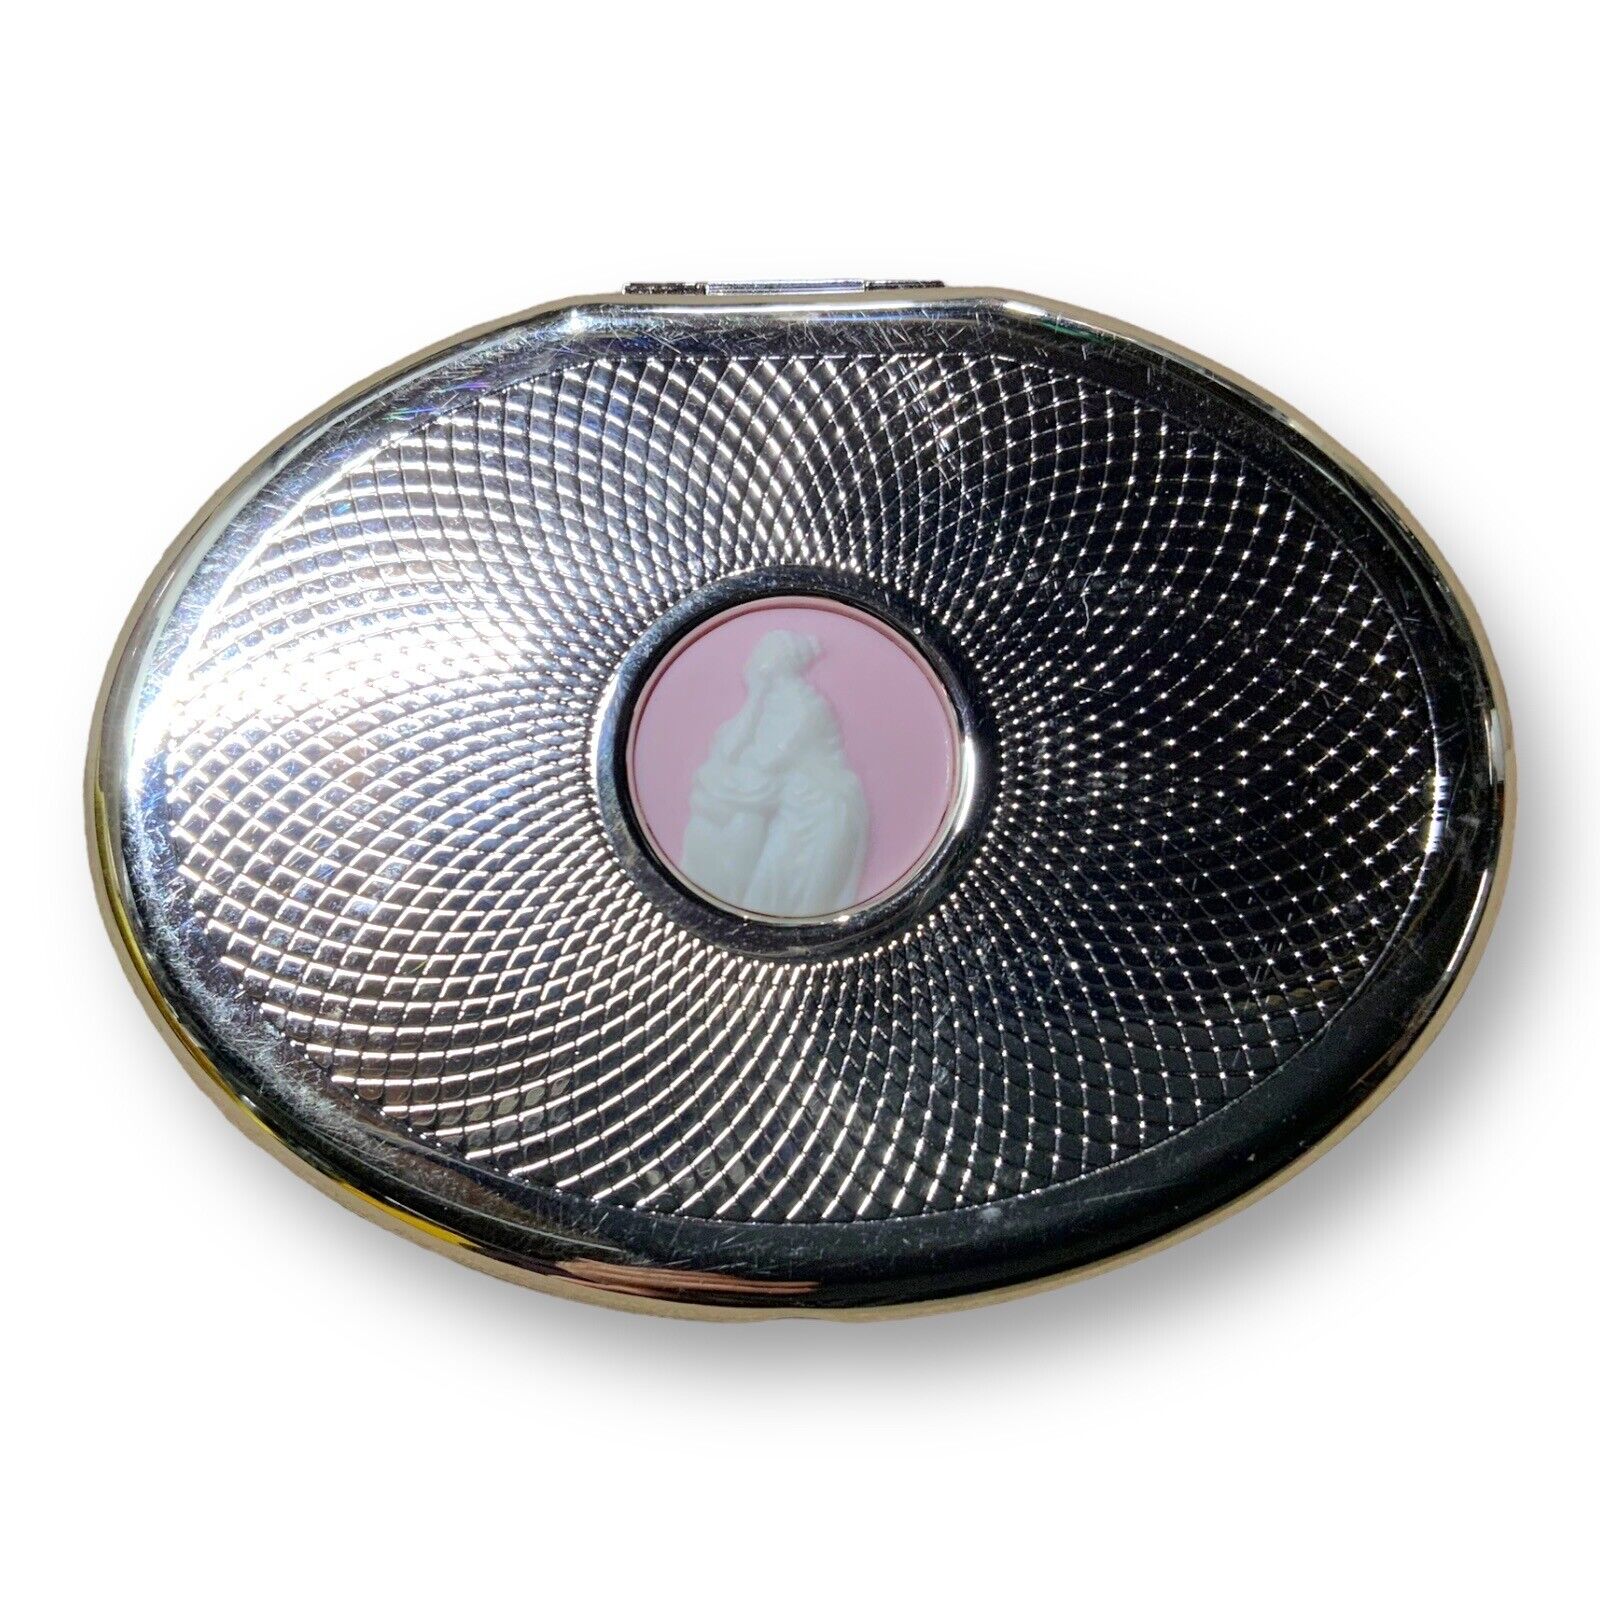 Wedgwood Compact Mirror Silver Tone Pink Cameo